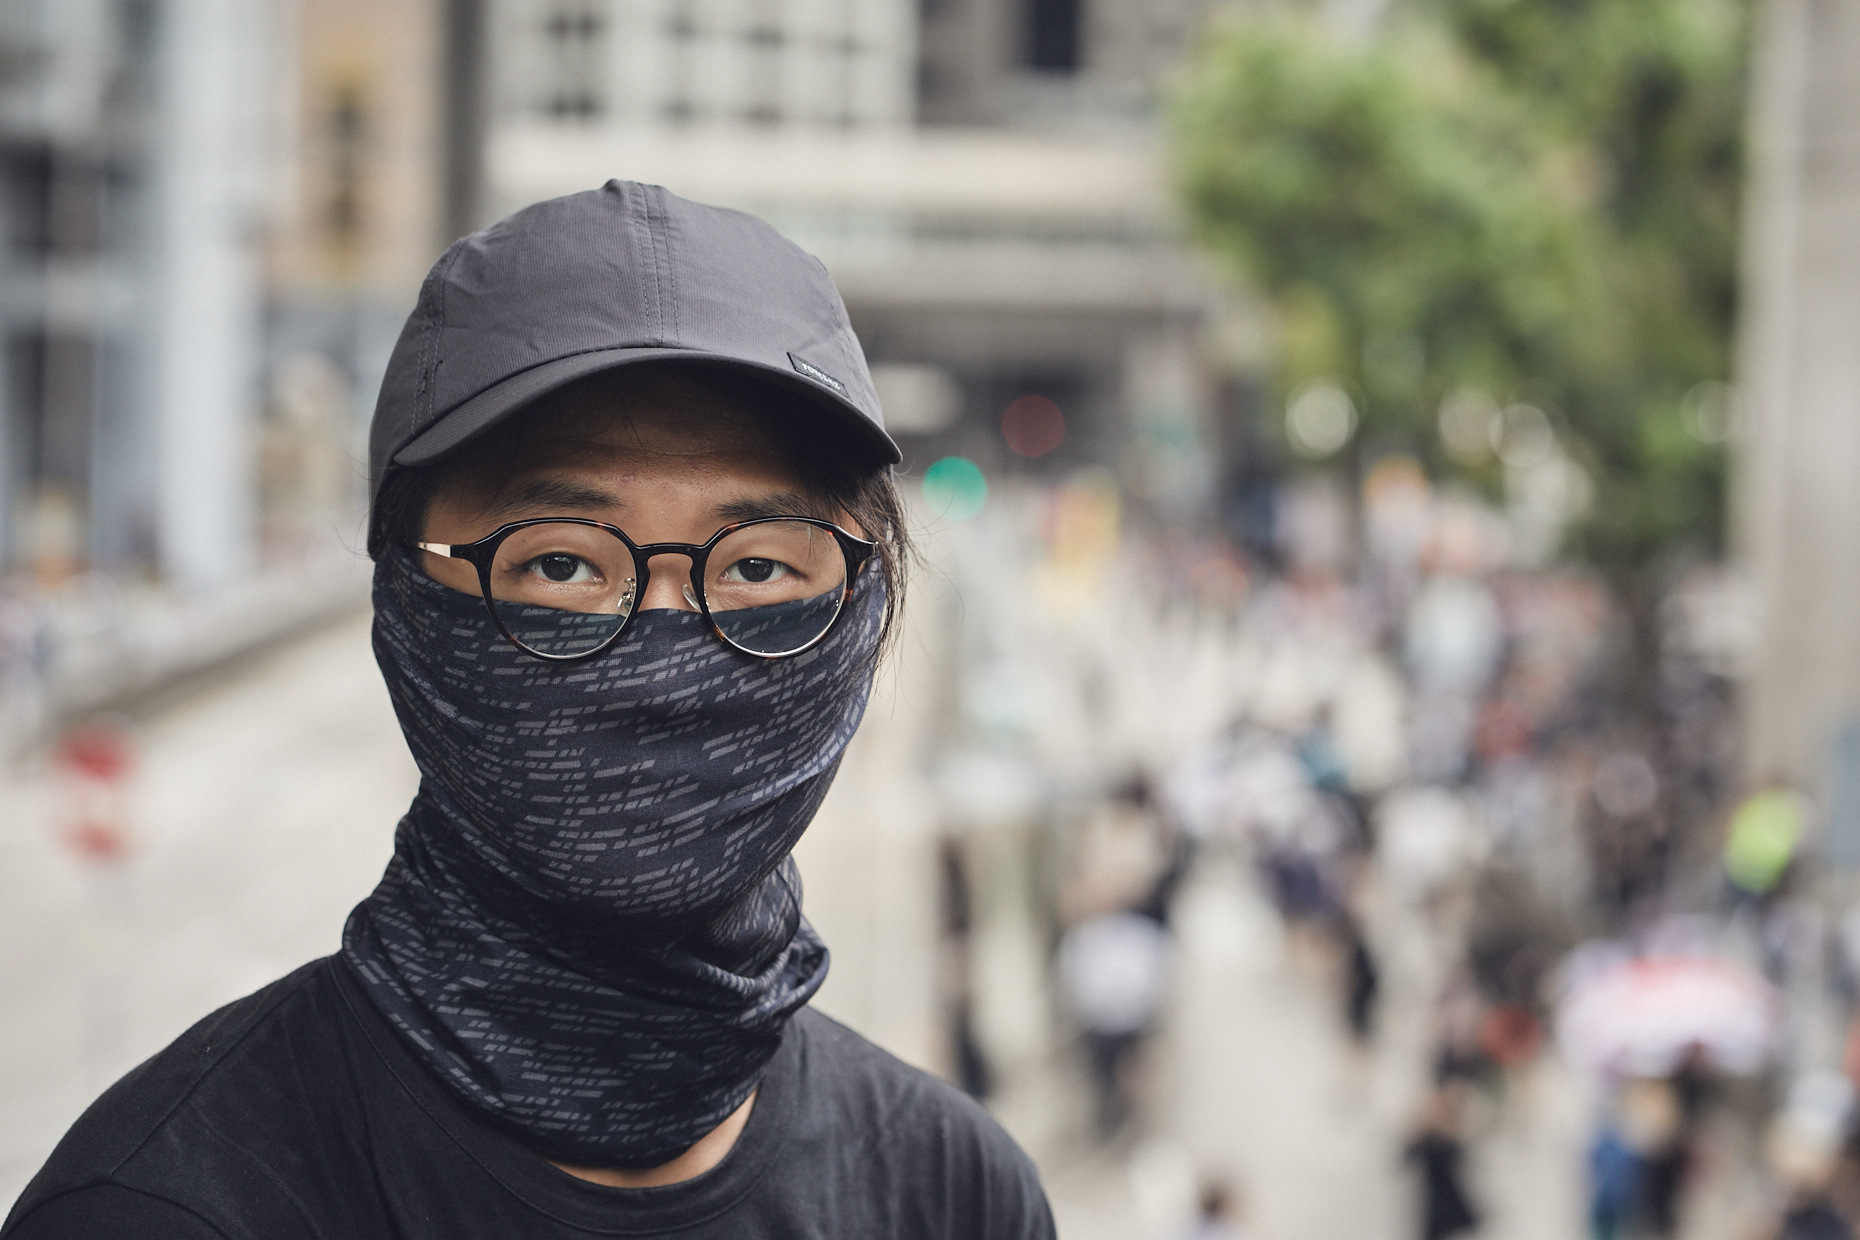 Portrait photograph of young man during the Hong Kong protests of 2019.